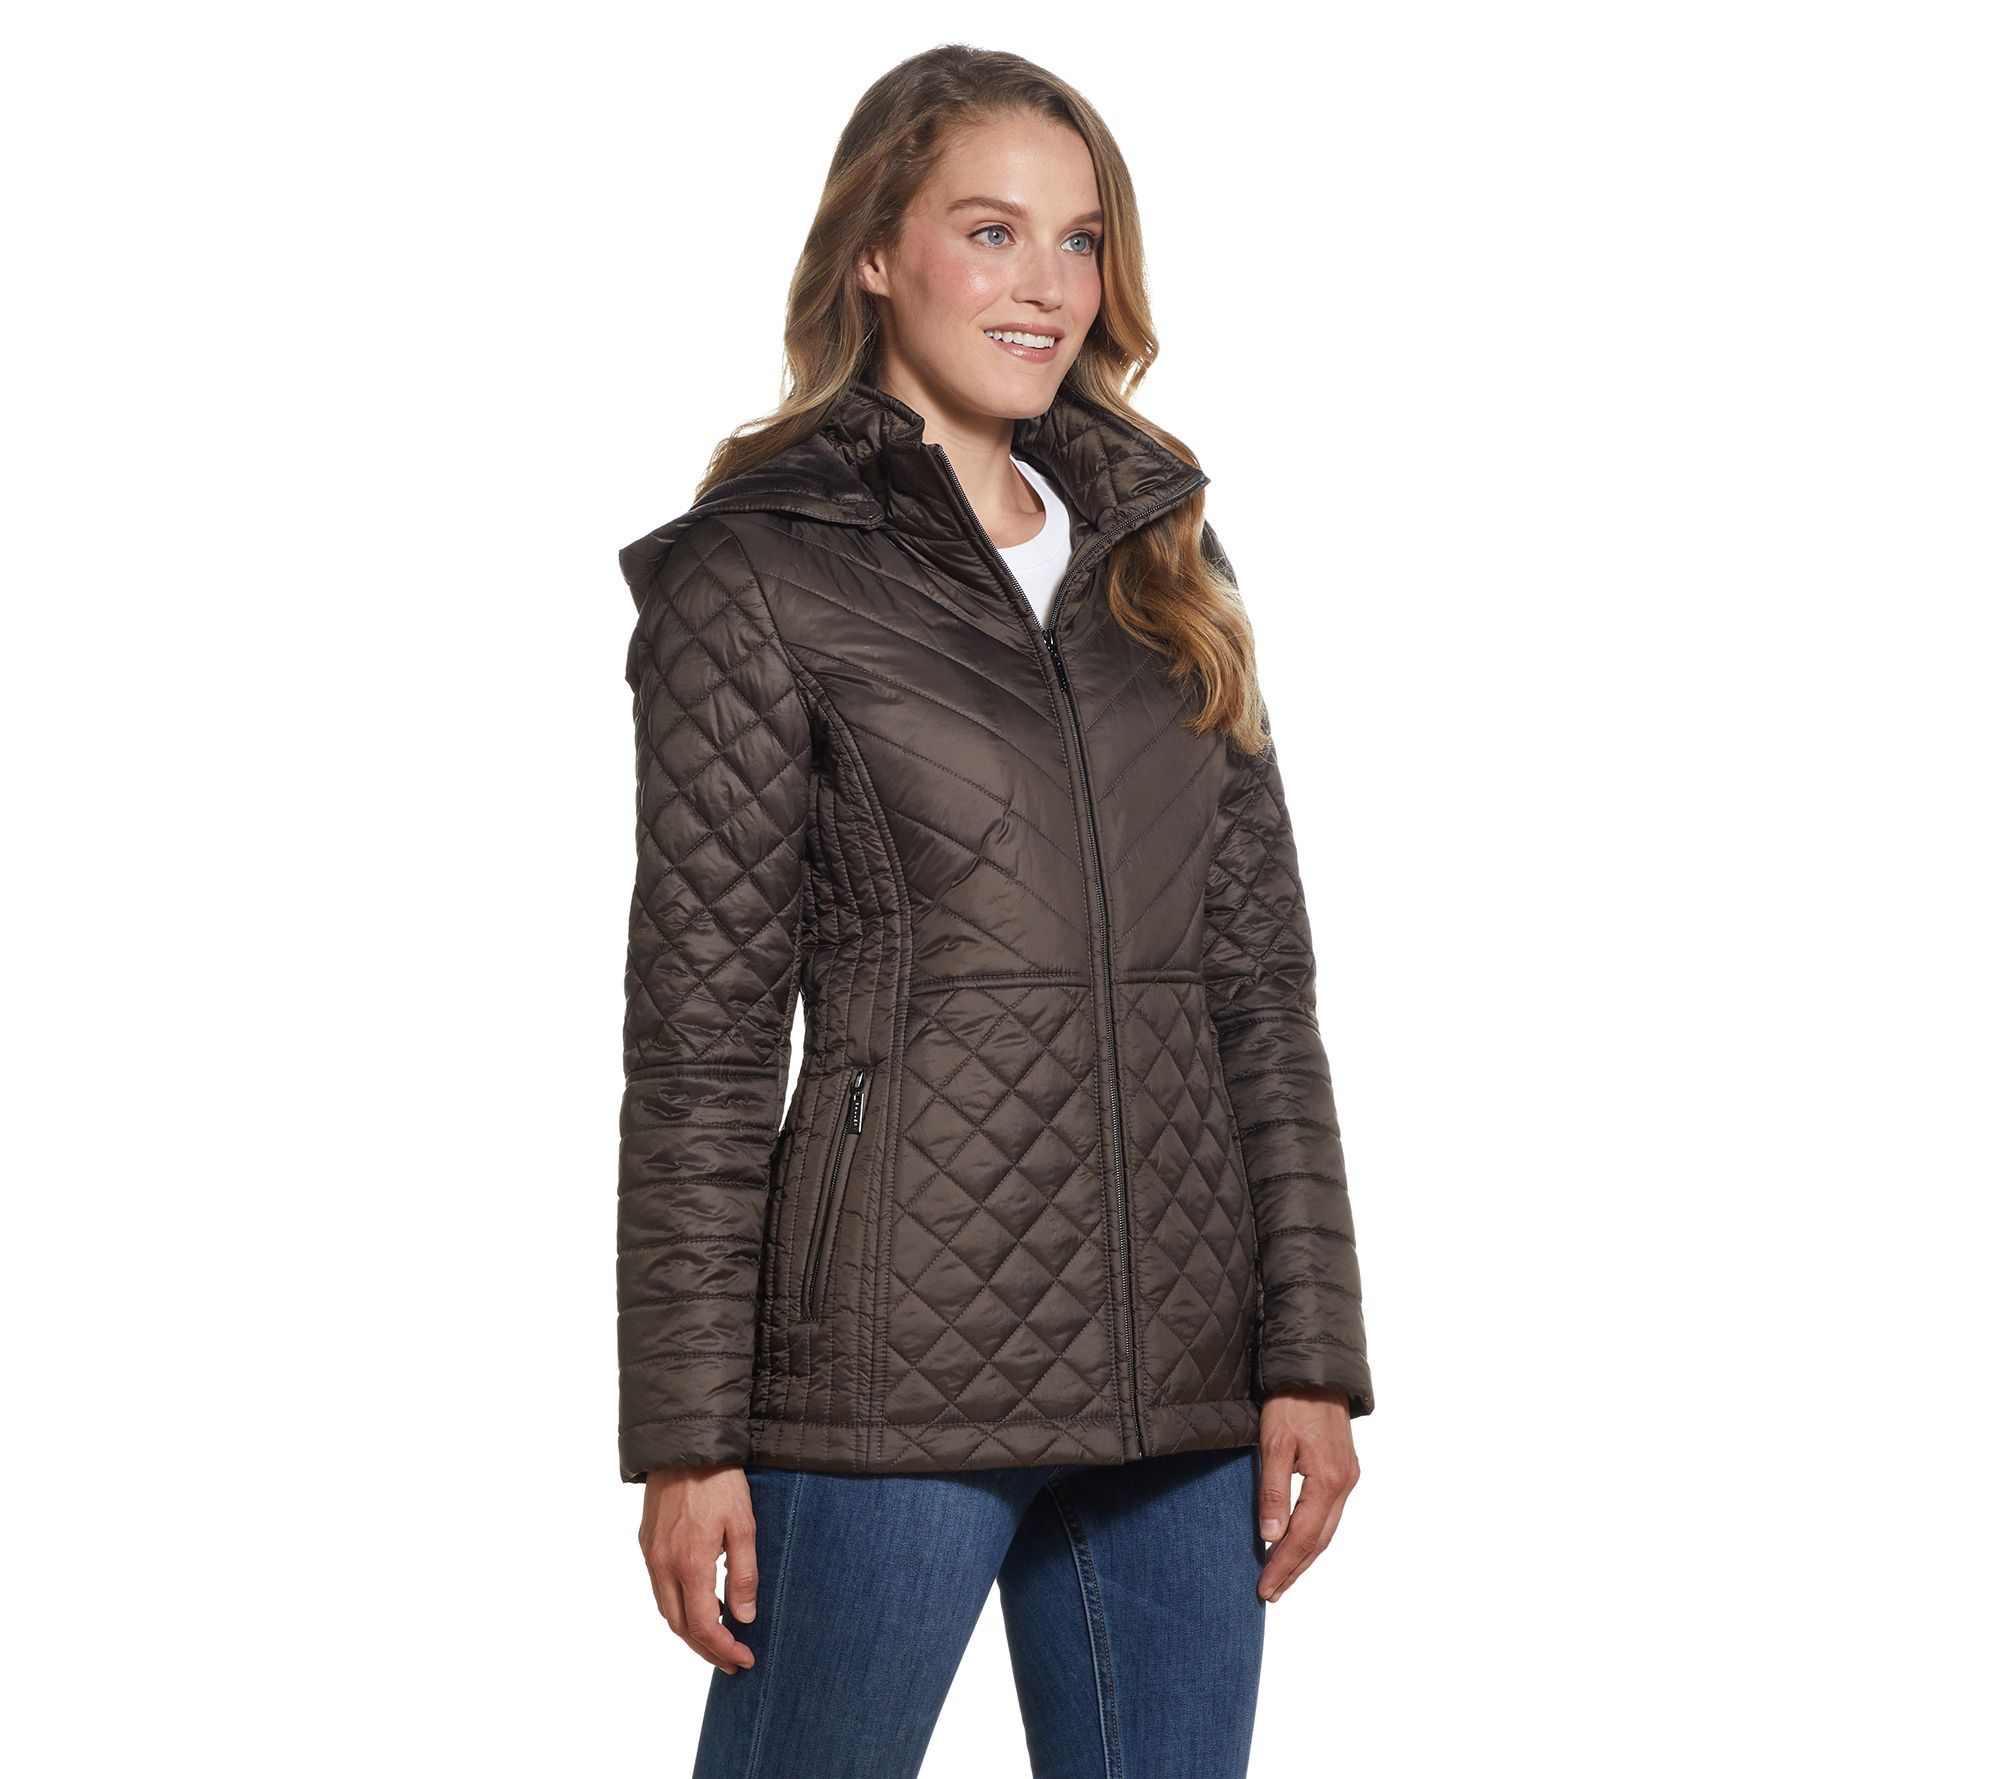 Gallery Chevron Quilted Jacket - QVC.com